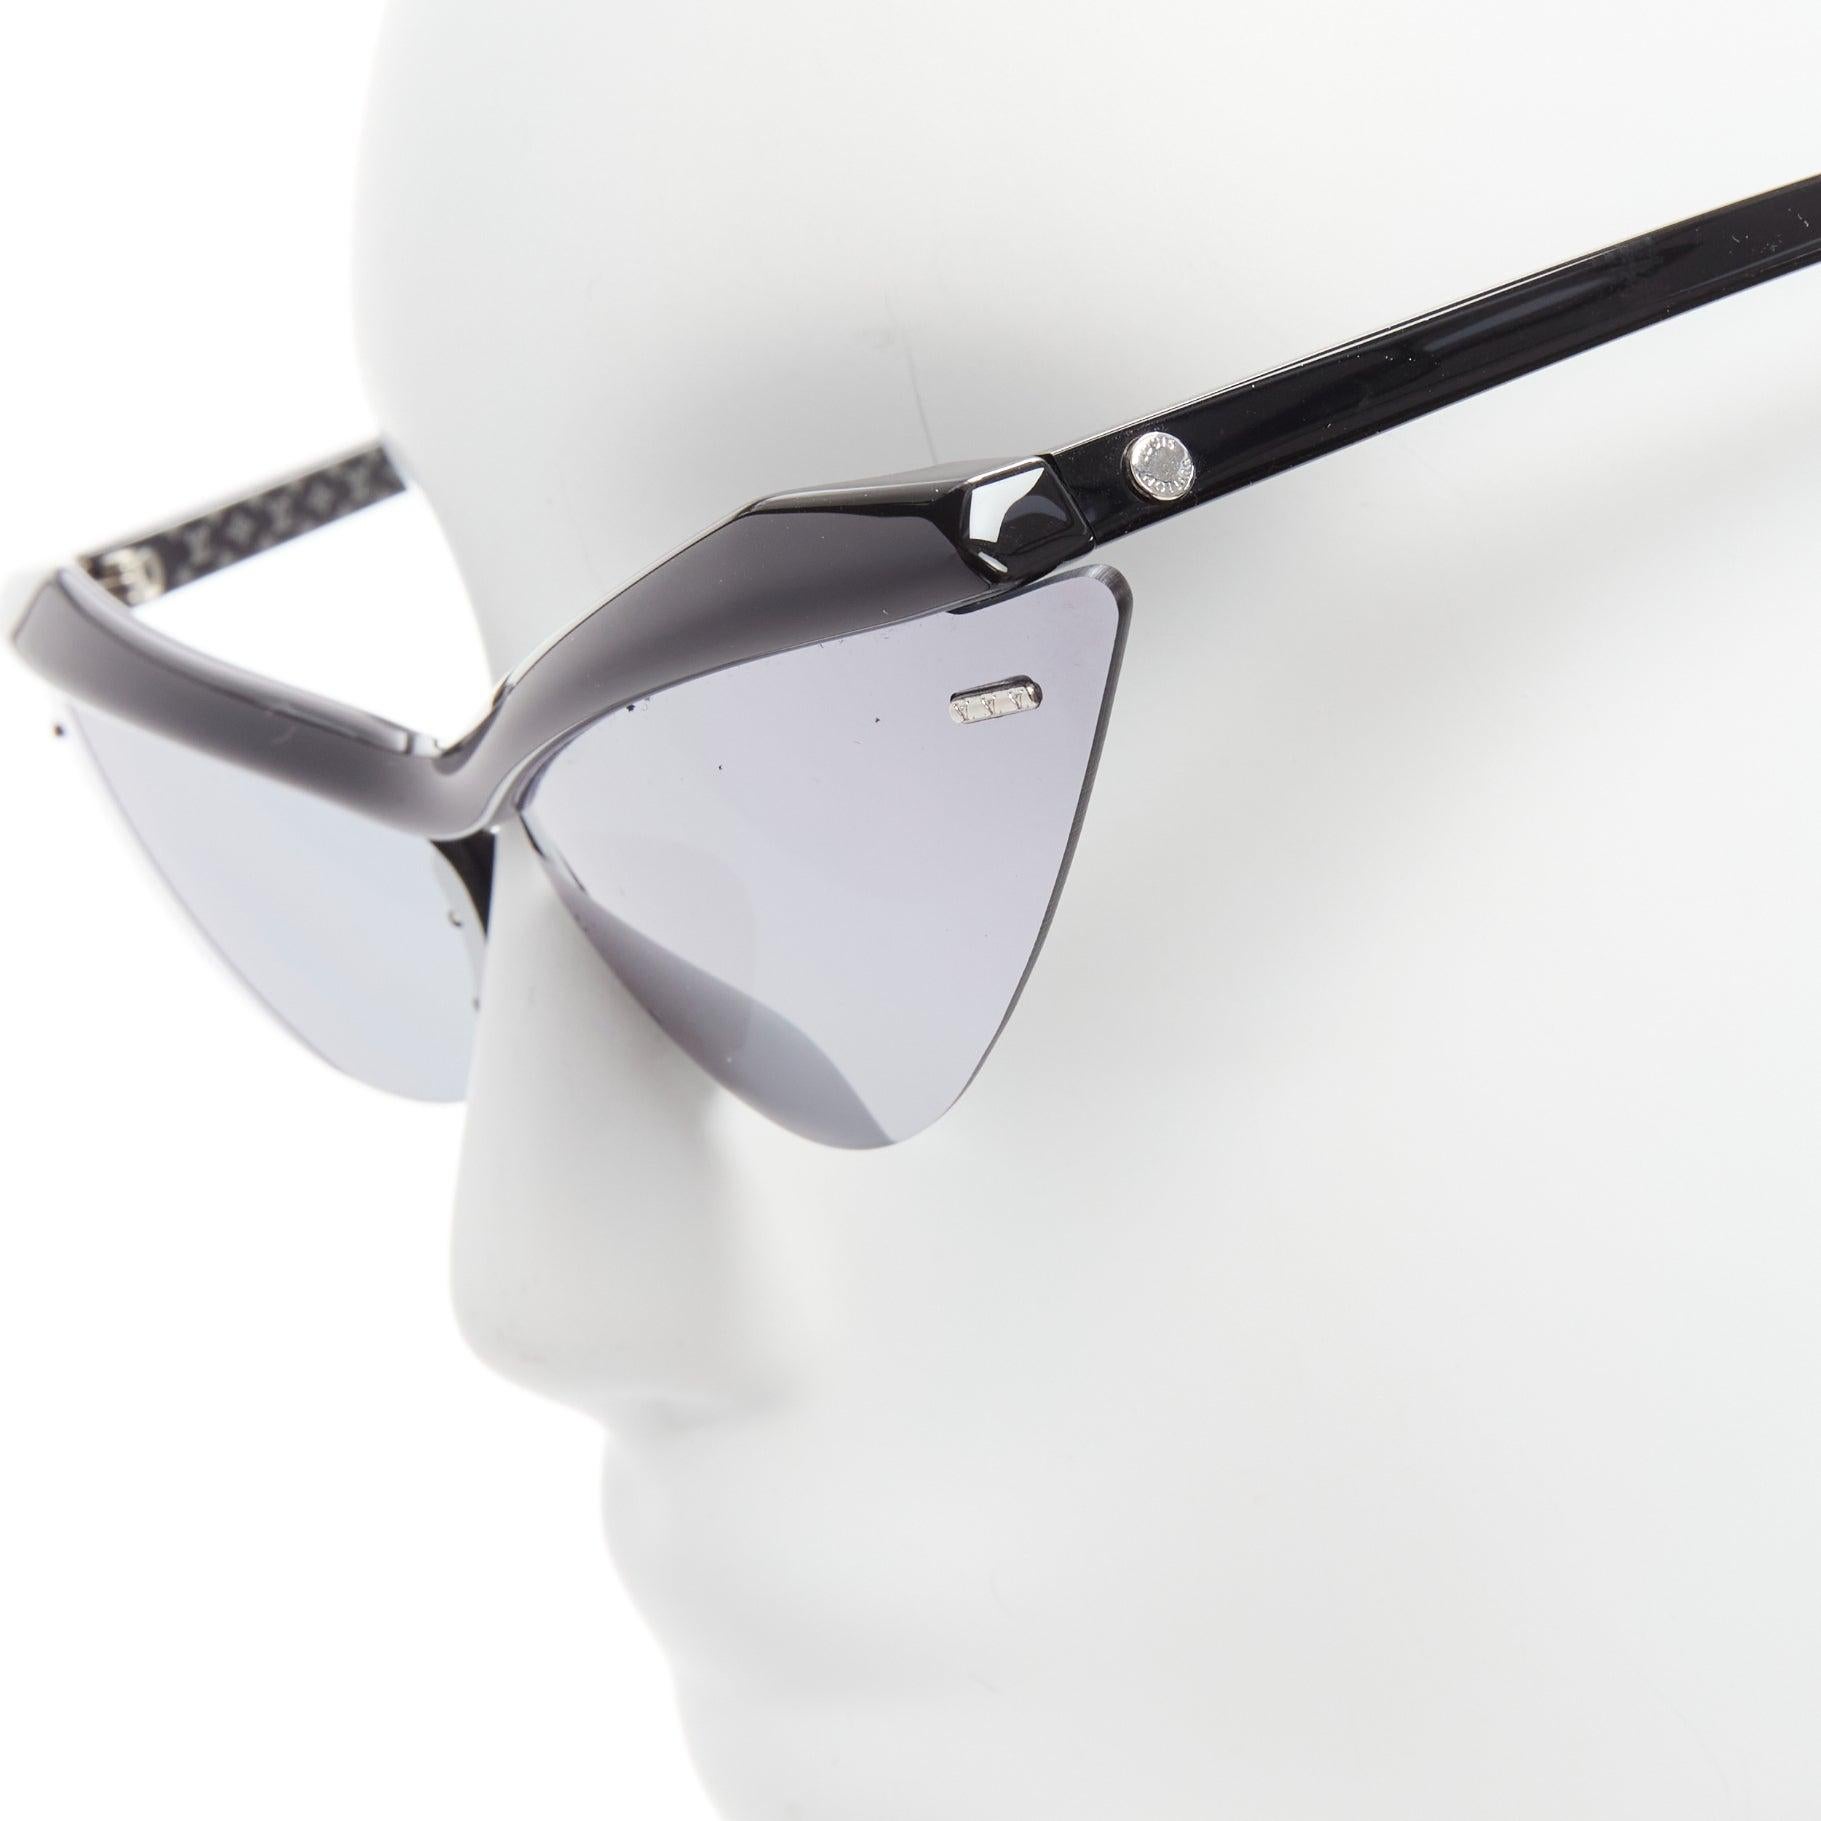 LOUIS VUITTON Z1011U For Your Eyes Only silver cat eye sunglasses
Reference: BSHW/A00107
Brand: Louis Vuitton
Designer: Nicolas Ghesquiere
Model: Z1011U
Material: Acetate
Color: Black, Silver
Pattern: Monogram
Closure: Pull On
Lining: Black